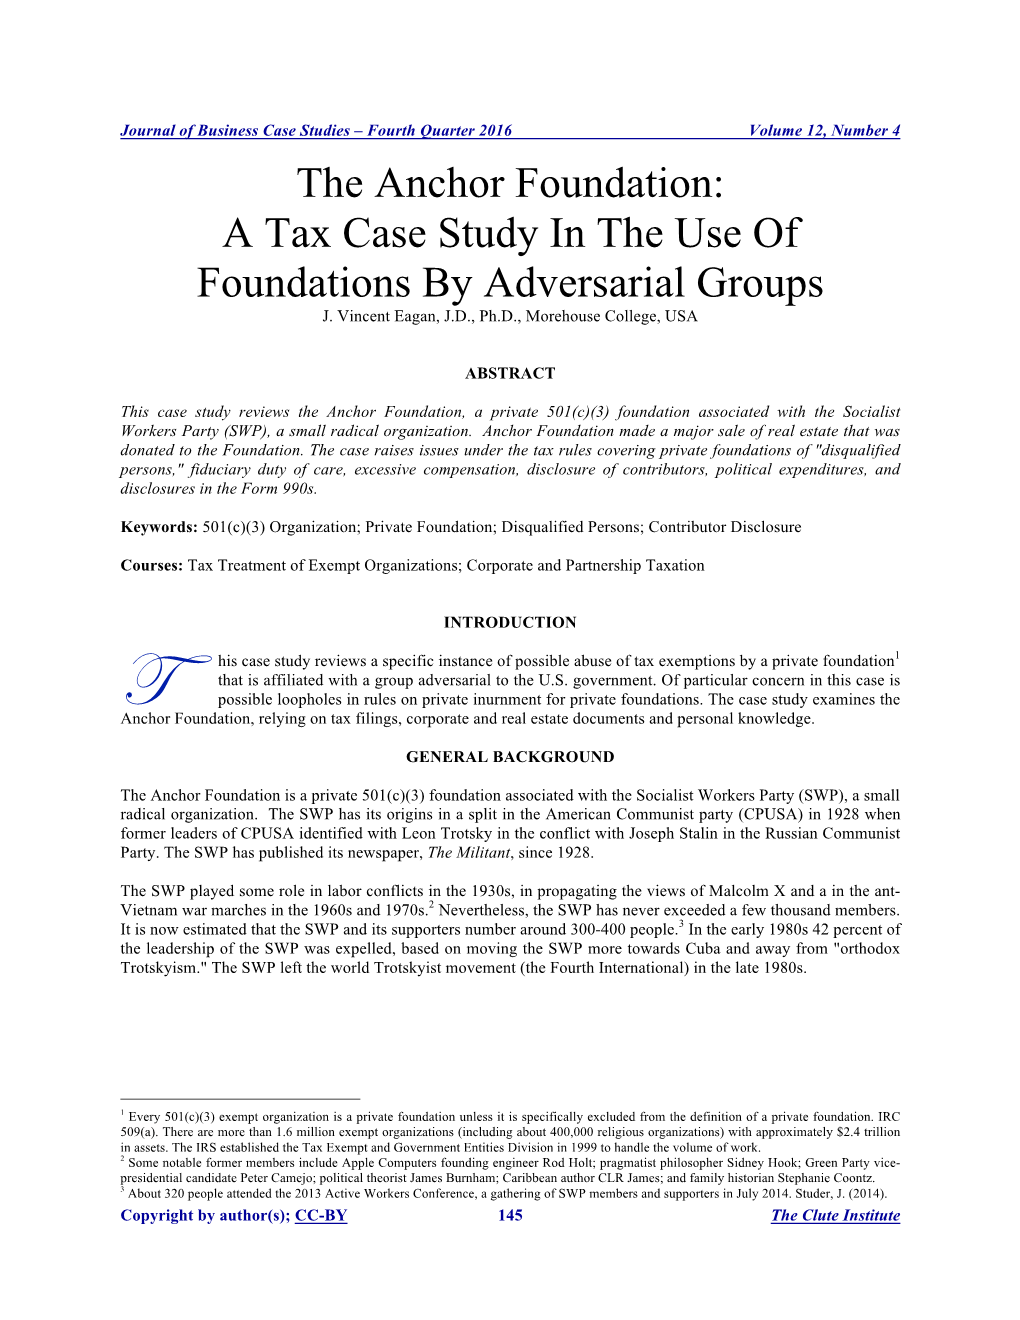 The Anchor Foundation: a Tax Case Study in the Use of Foundations by Adversarial Groups J